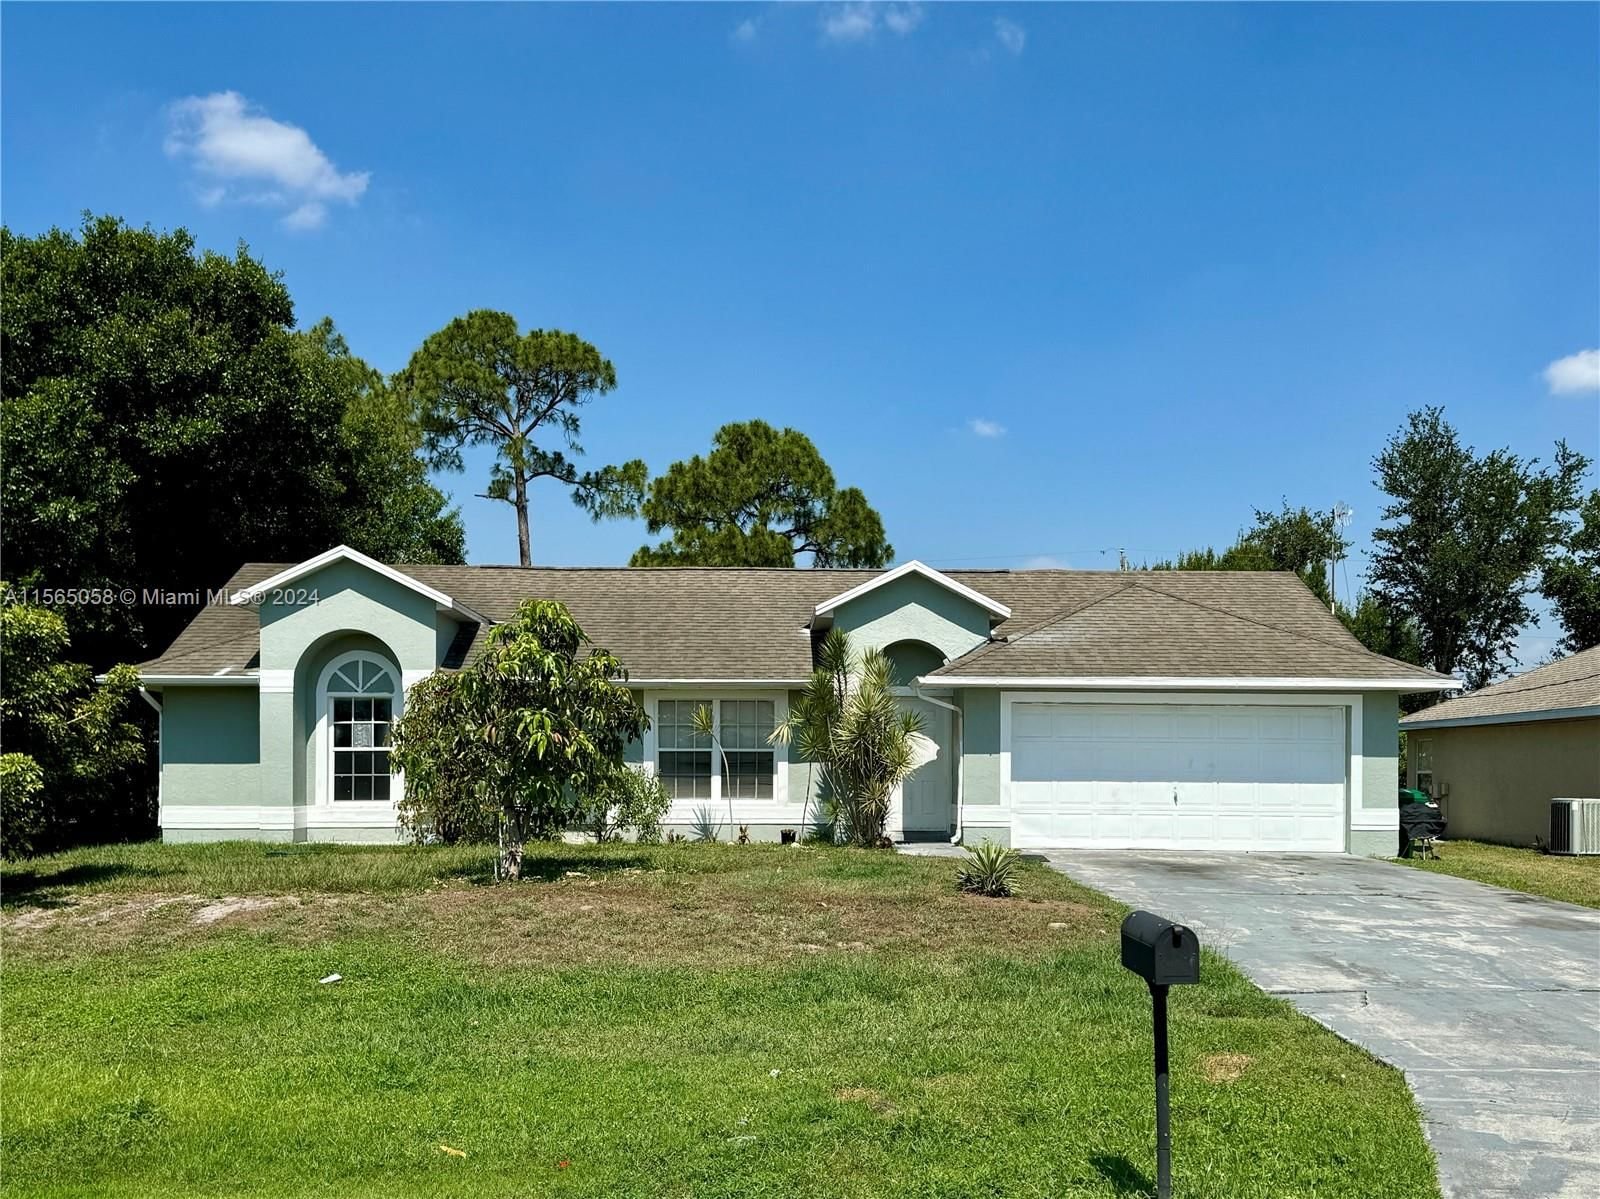 Real estate property located at 766 Hibiscus St, St Lucie County, PORT ST LUCIE SECTION 27, Port St. Lucie, FL